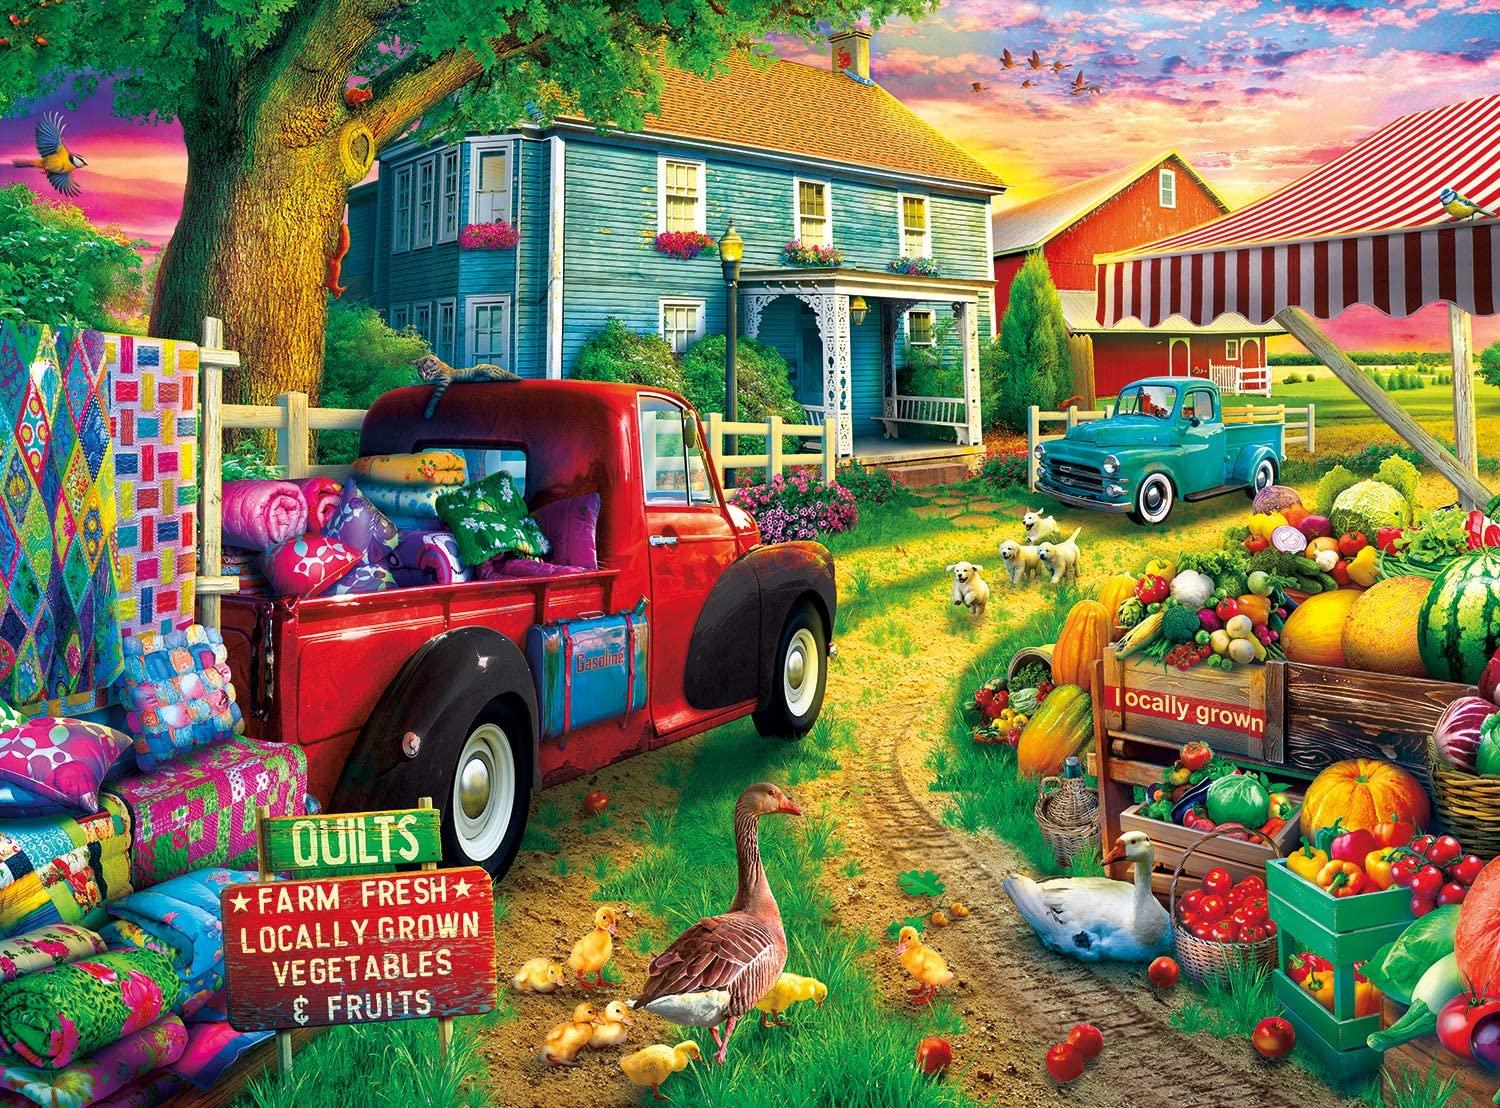 In this bright and colorful puzzle, a classic red pick up truck carries an array of homemade quilts. Enjoy piecing together this colorful and detailed puzzle. This puzzle contains 300 large pieces, as is titled Quilt Farm by Buffalo Games.